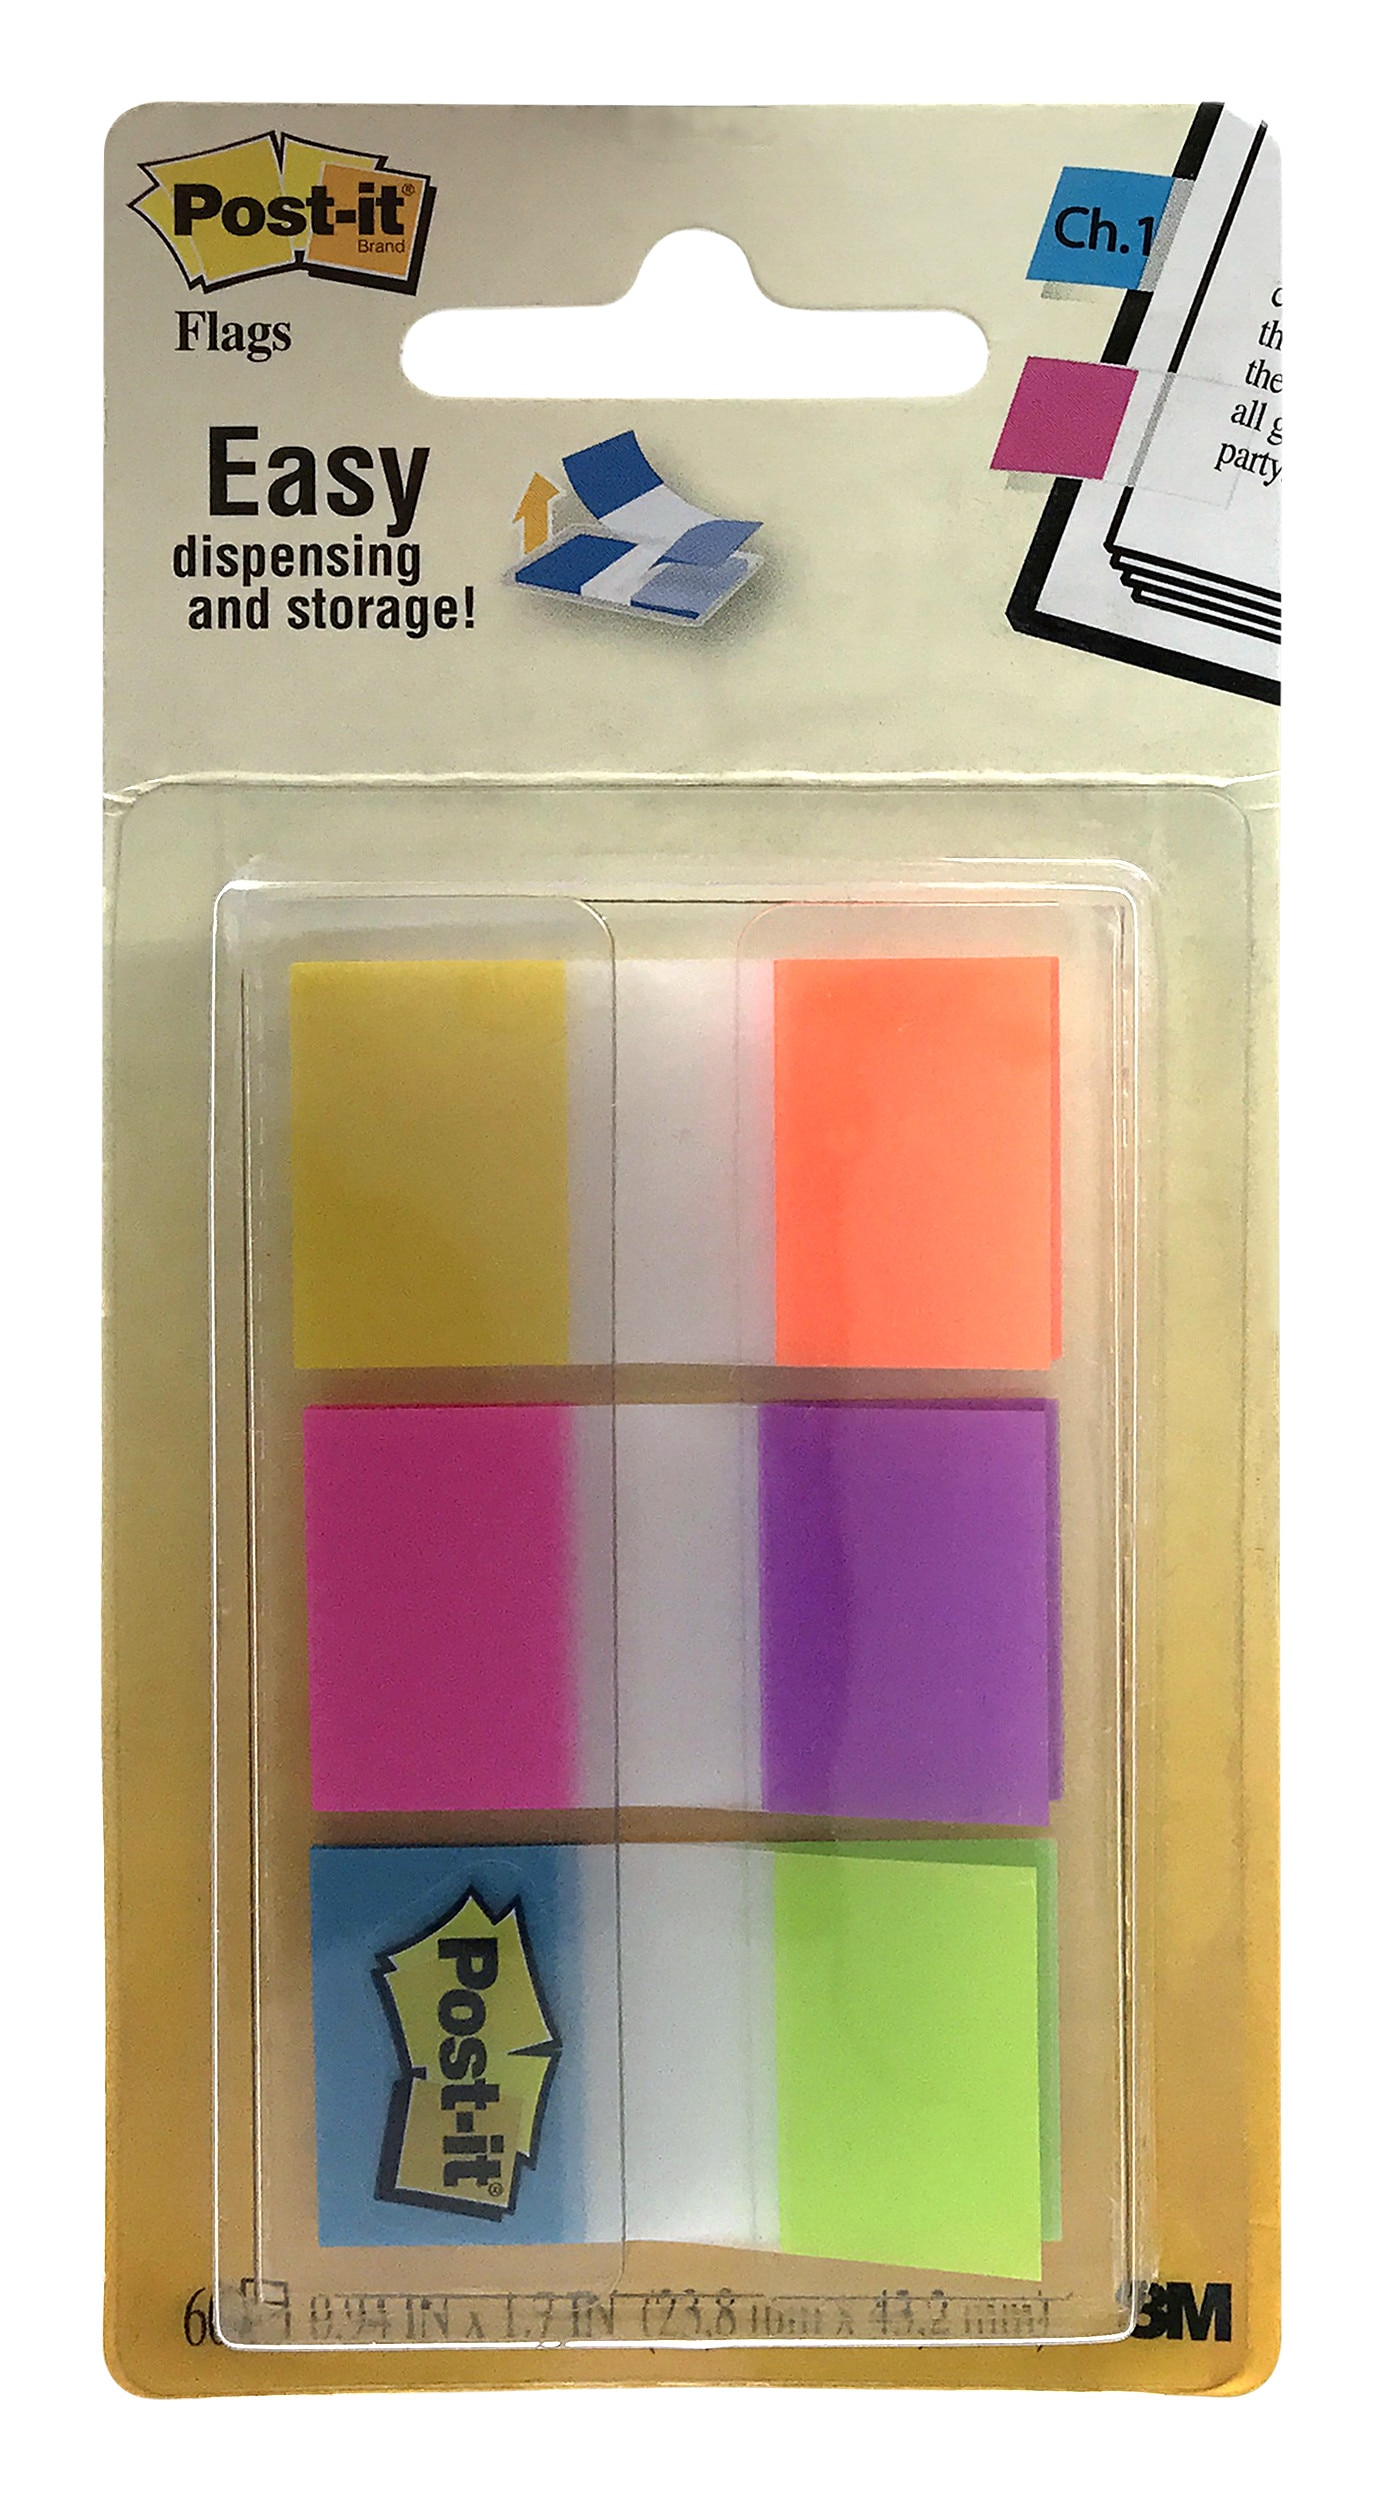 3M Post-it Flags Electric Glow Collection, 60 Flags